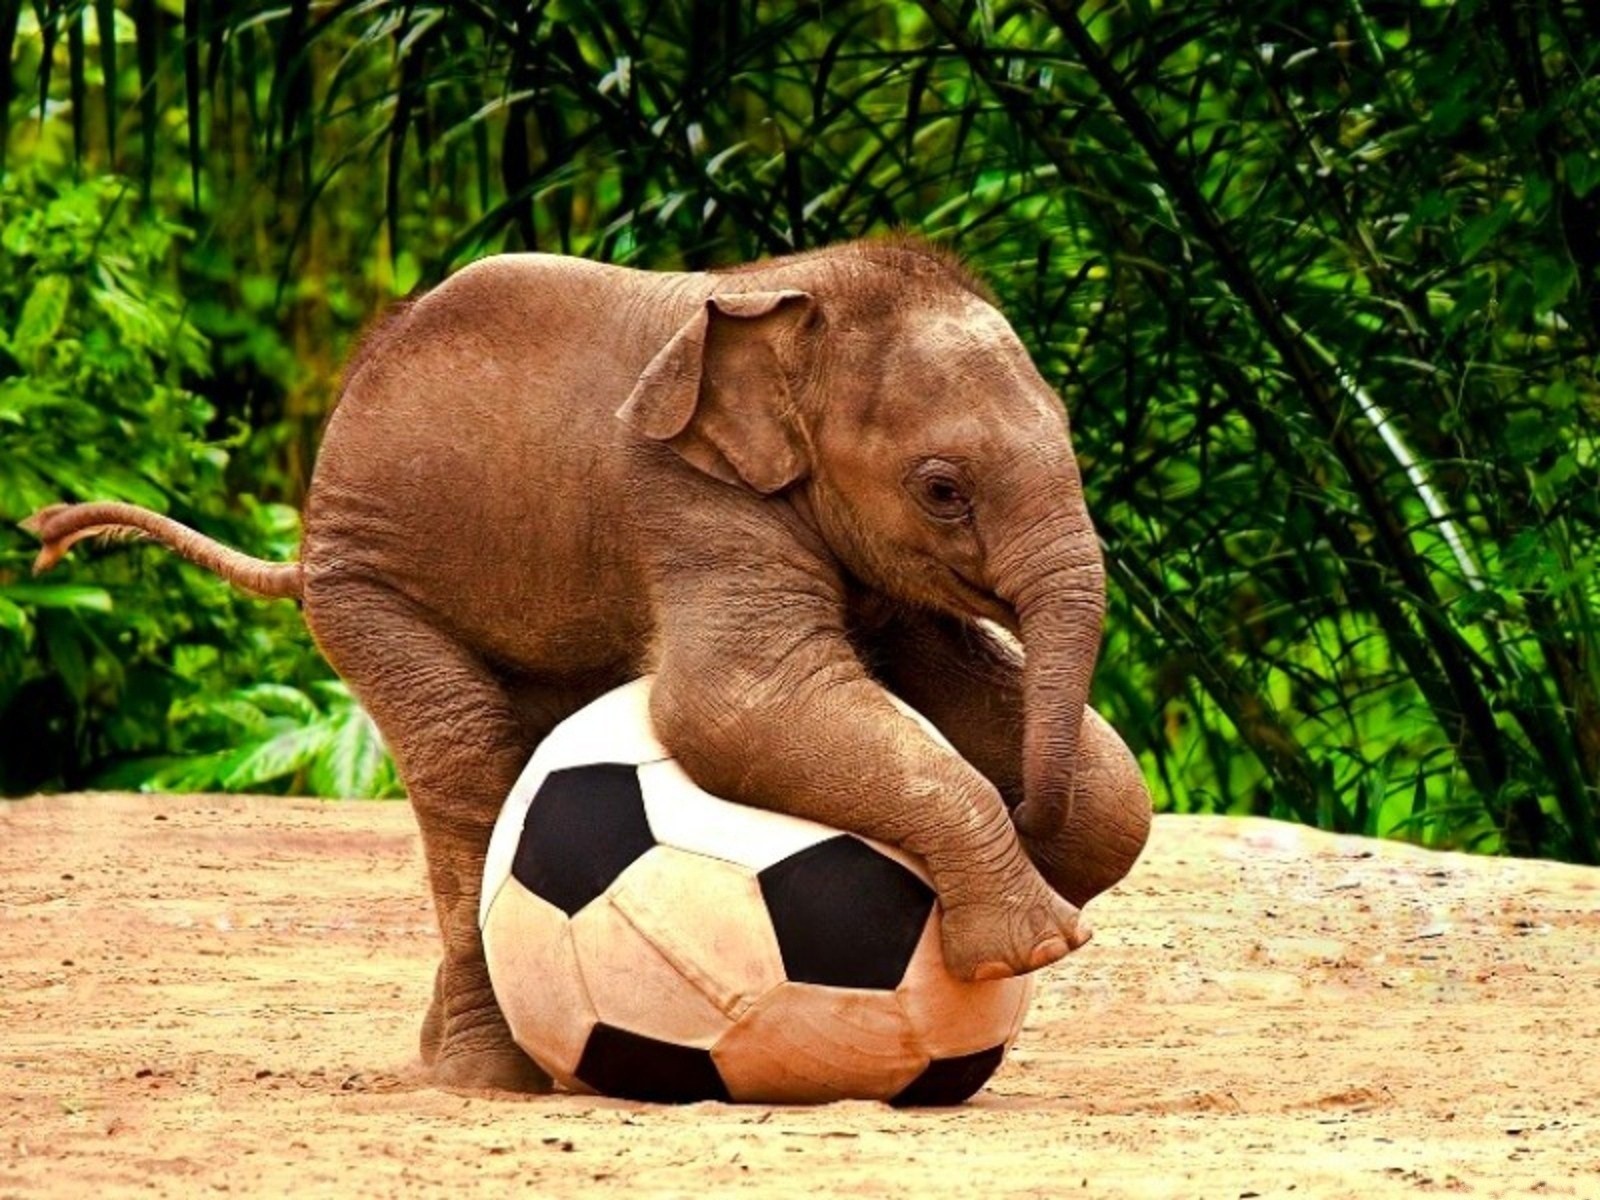 Cute Elephant Baby Kid Play With Football Wallpaper HD